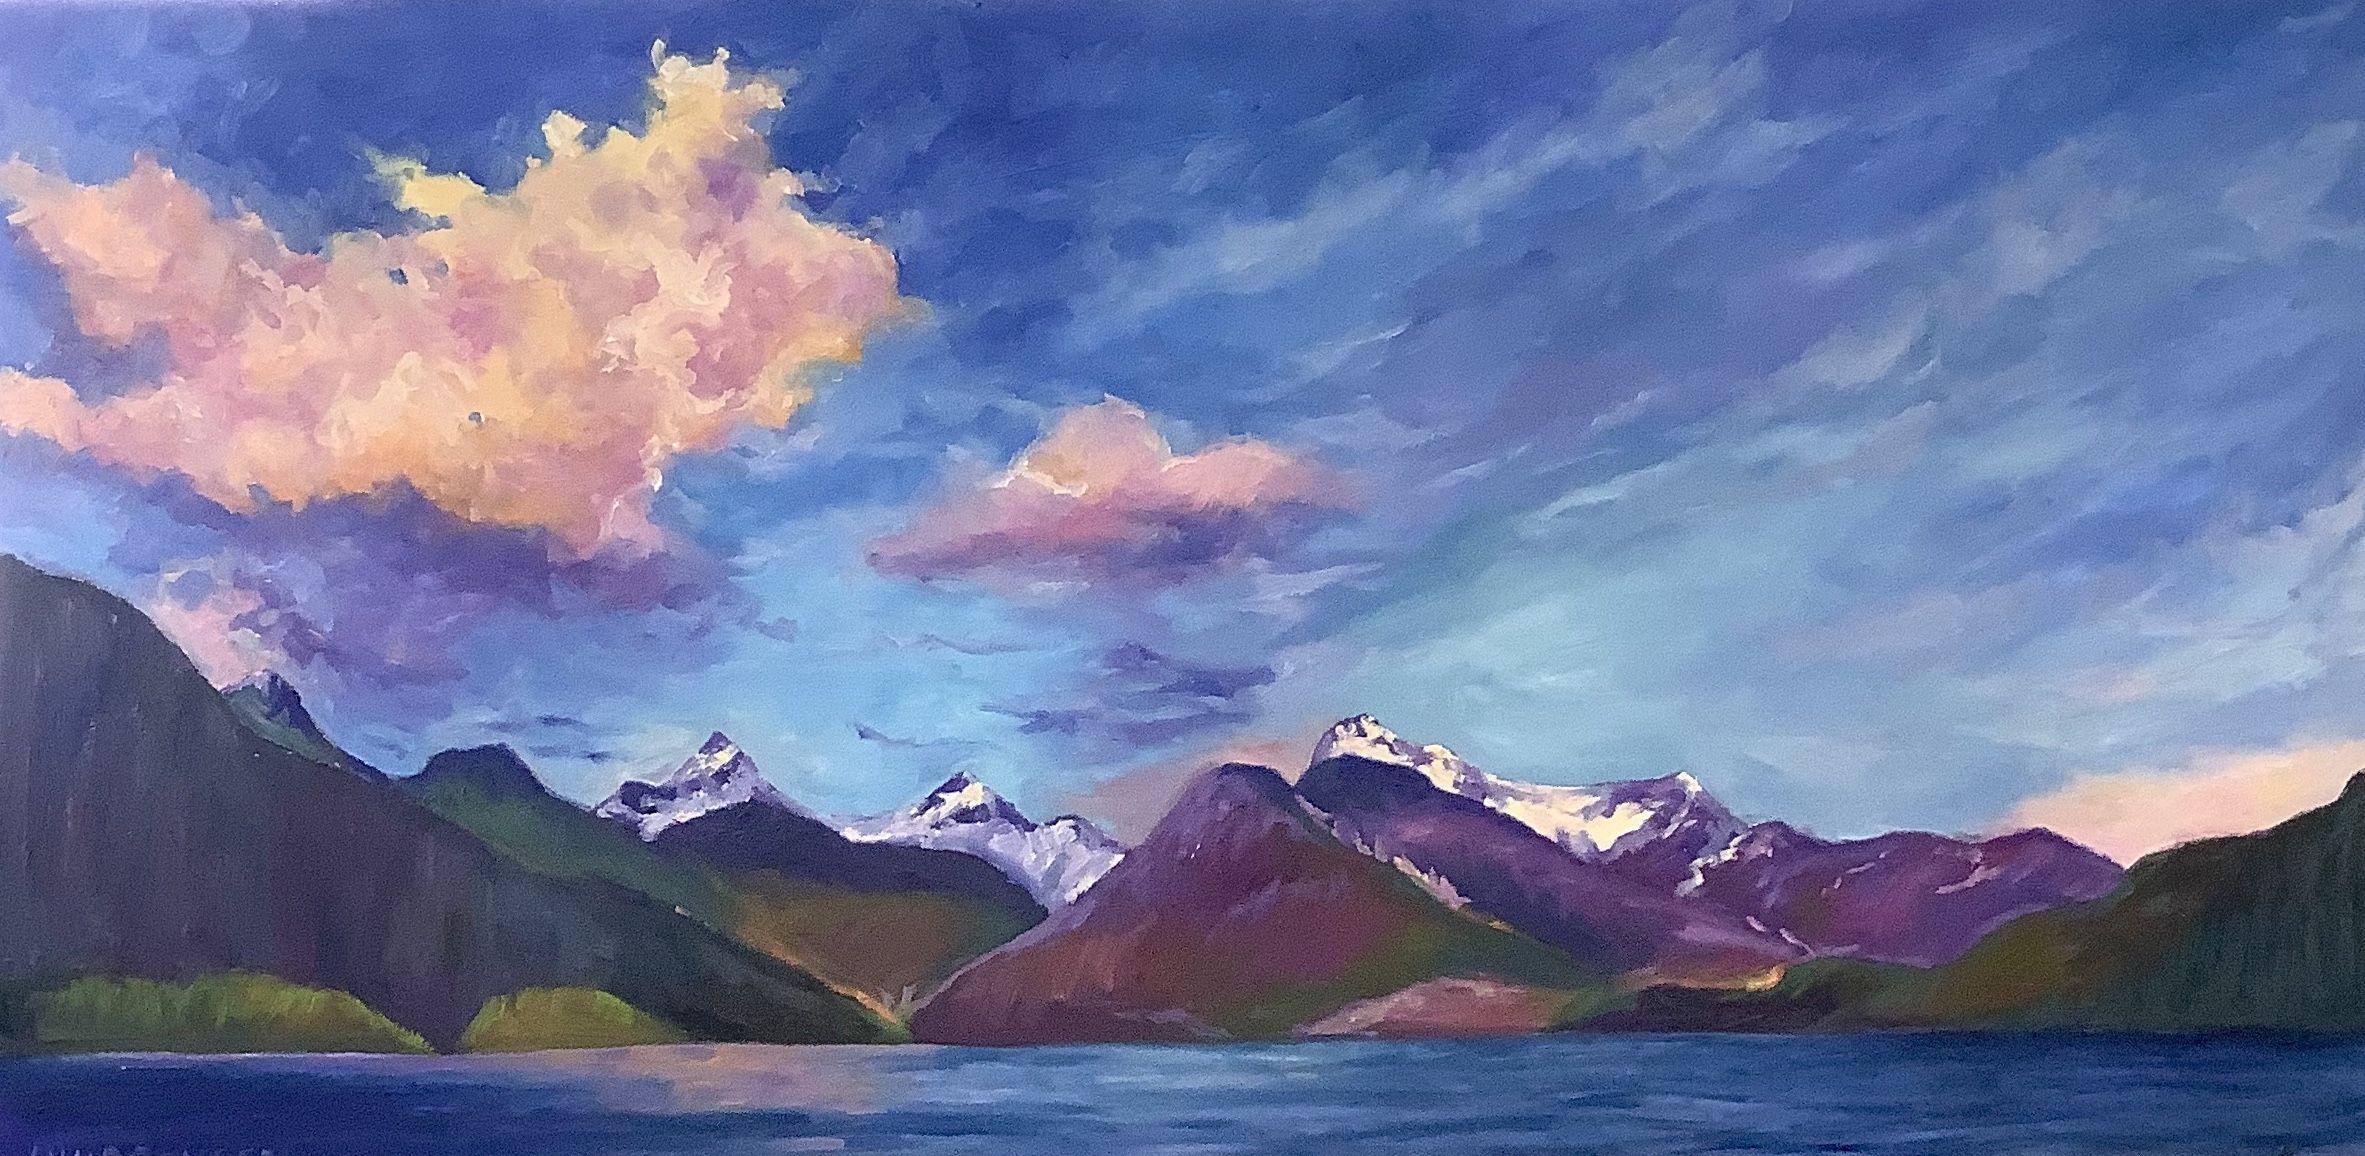 Powell lake is on the coastal region of British Columbia and is a source of inspiration for this painting. On this particular day the clouds stole the show and I wanted to make them the star of this painting. The sides of the slender canvas have